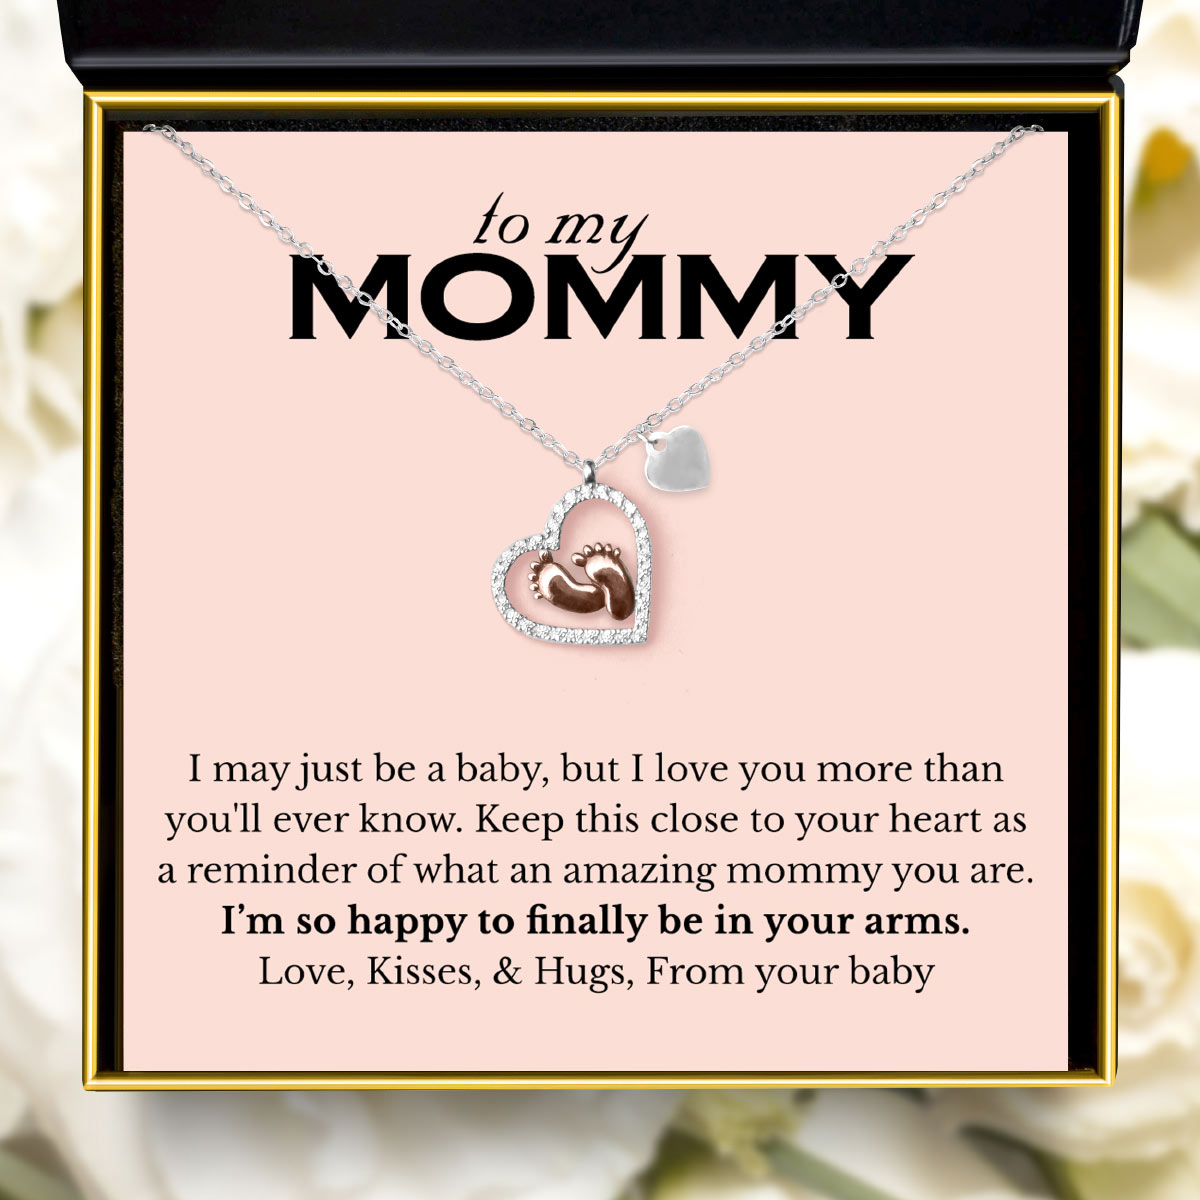 To My Mommy, Finally in your Arms (Pink Edition) - Baby Feet Necklace Gift Set